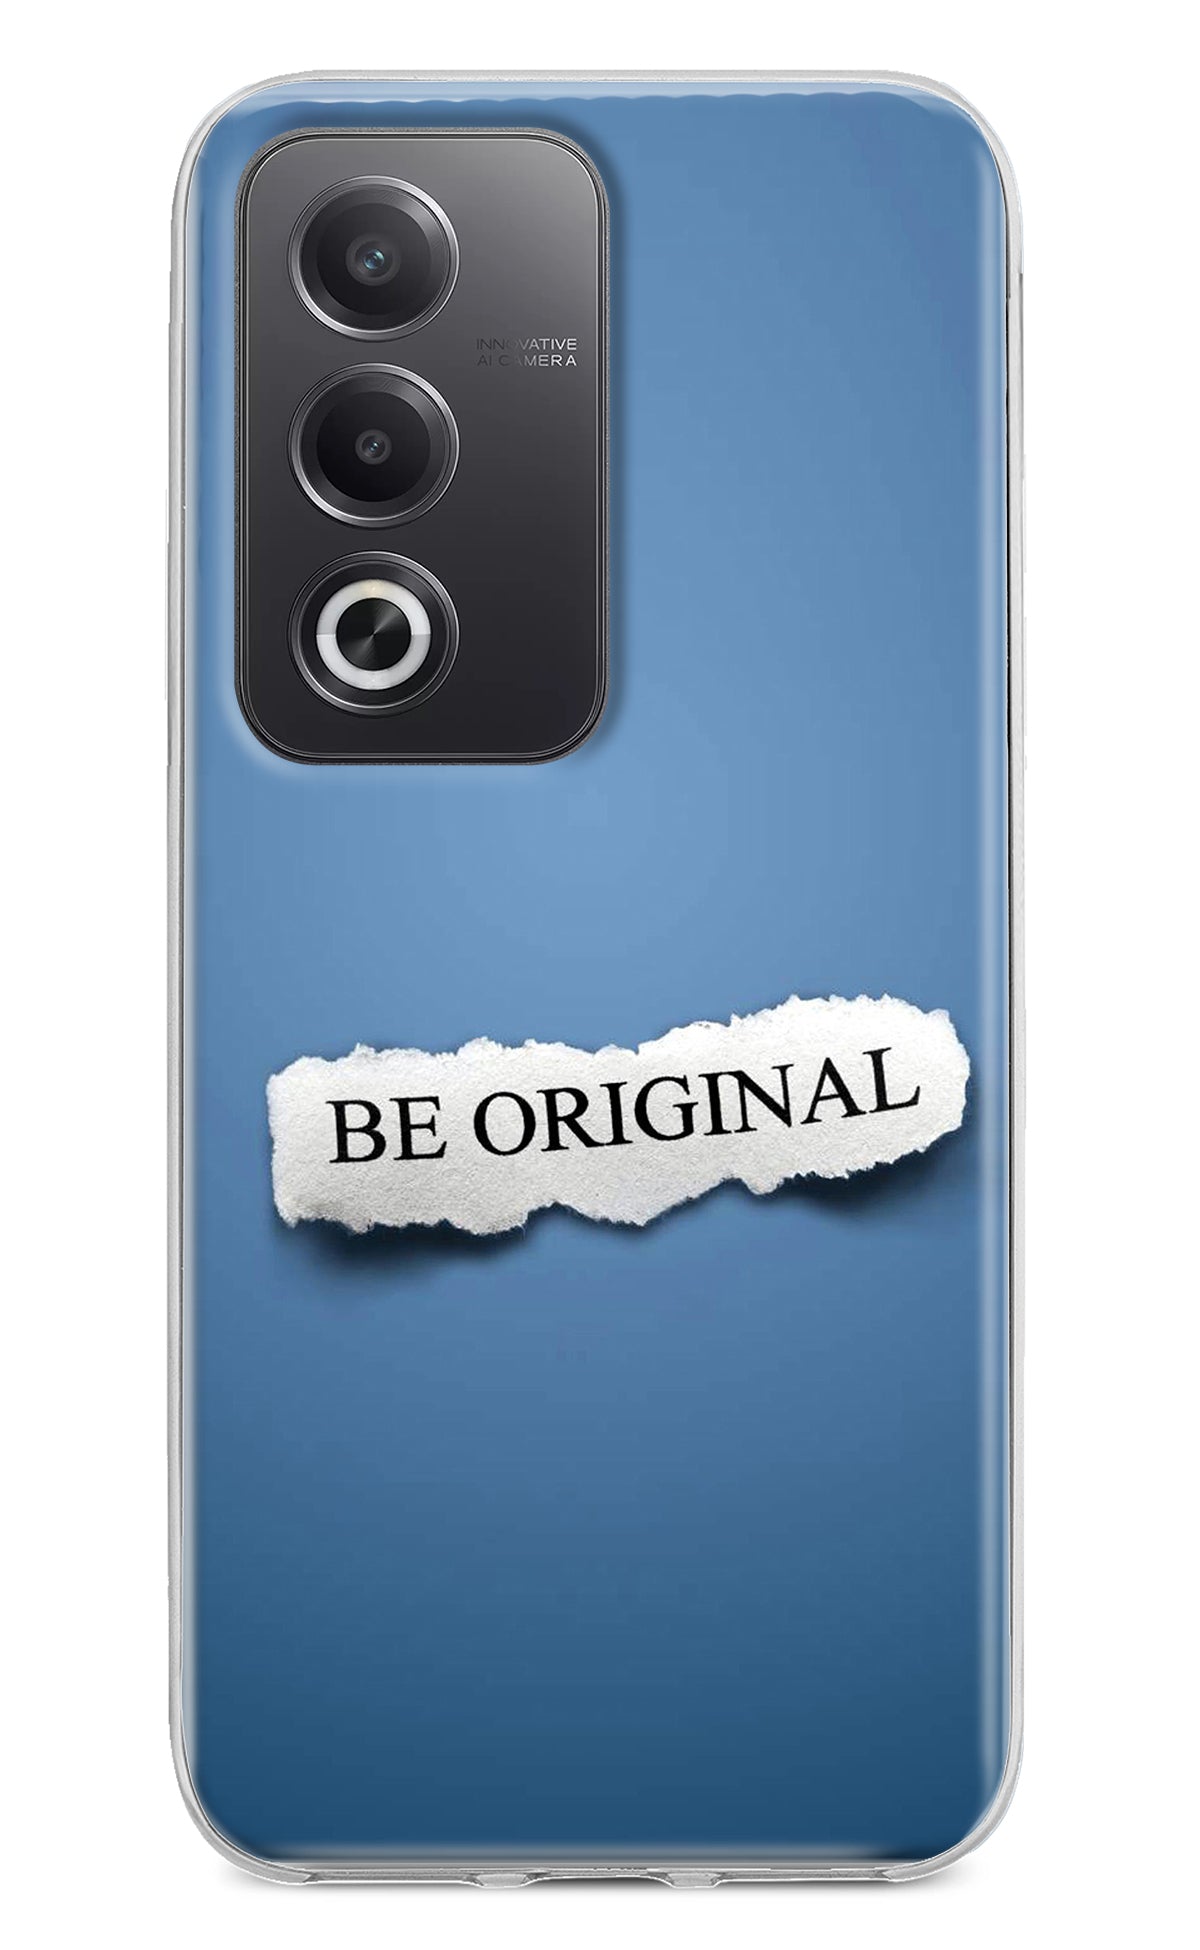 Be Original Oppo A3 Pro 5G Back Cover